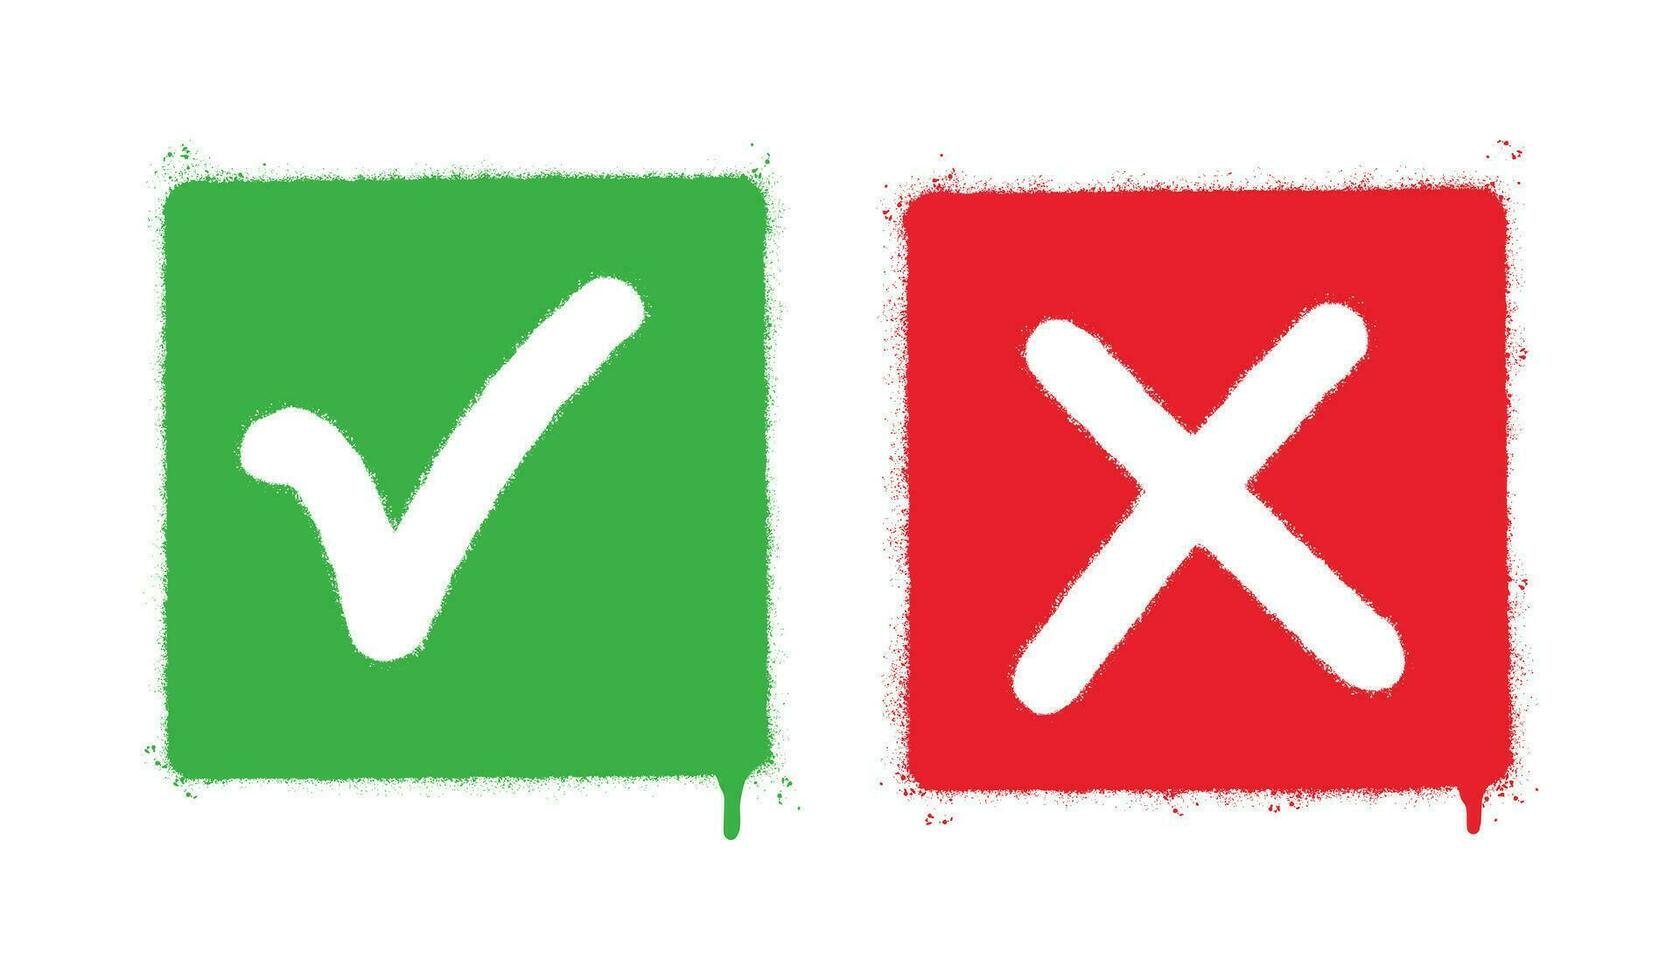 Spray Painted Graffiti Green tick check mark and cross mark icon Sprayed isolated with a white background. graffiti symbols YES and NO with over spray in black over white. vector